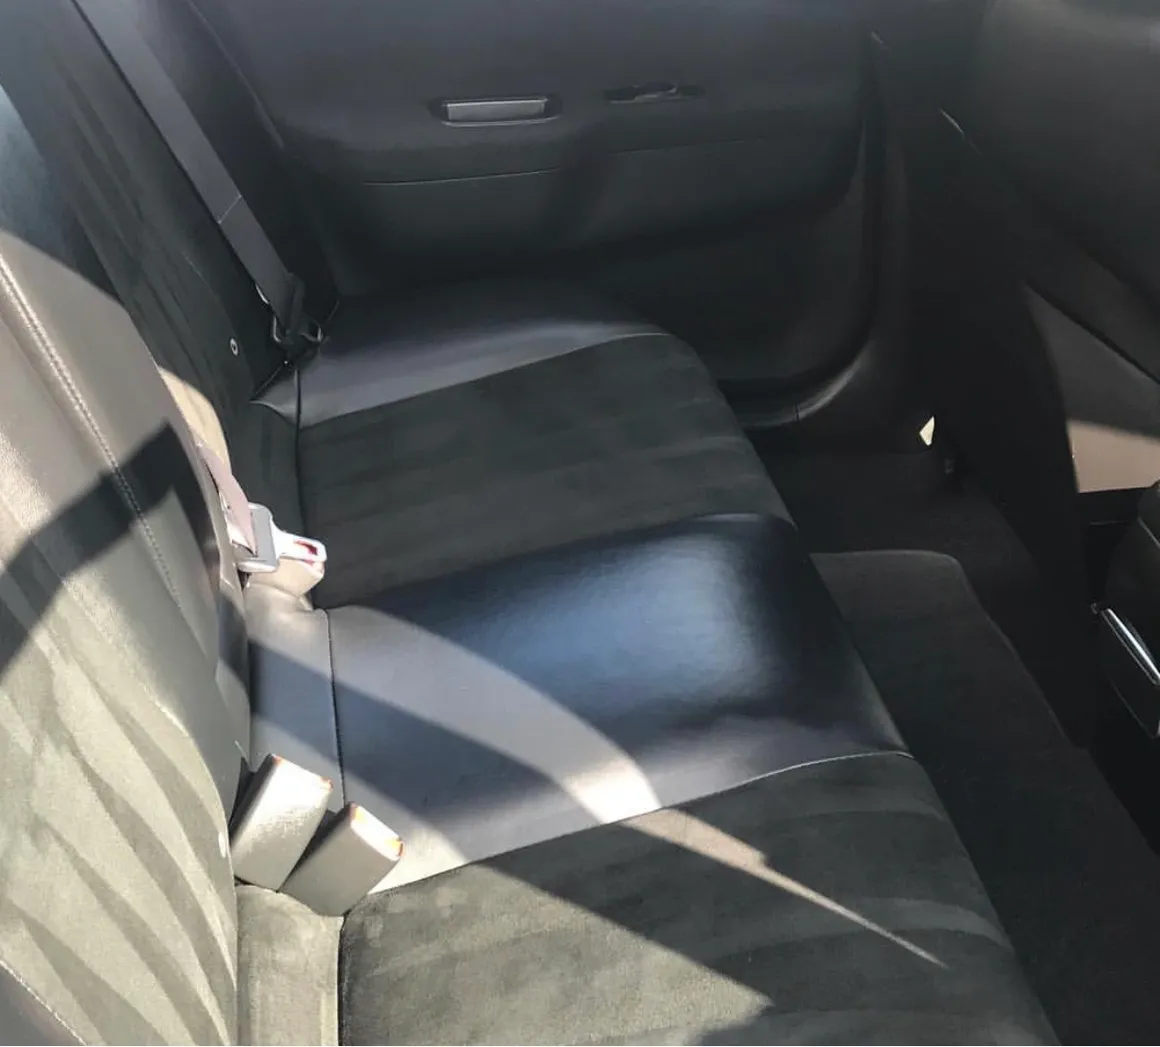 Car mold cleaning